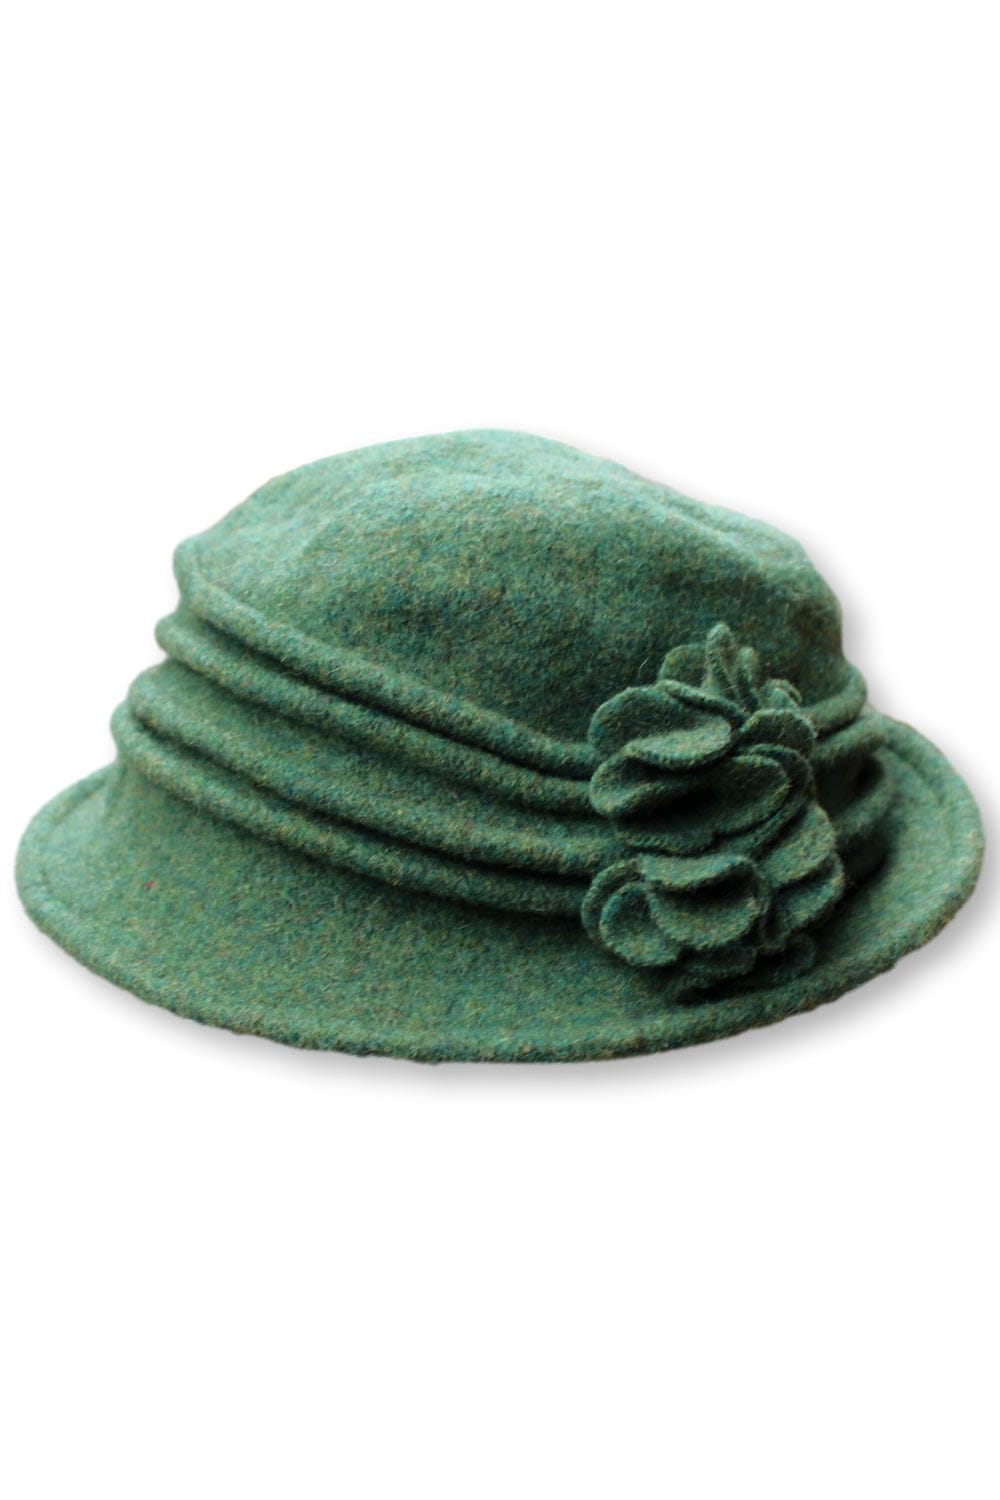 Womens Merino Wool hat with pleat detail and 2 side flowers. The hat is a green color.